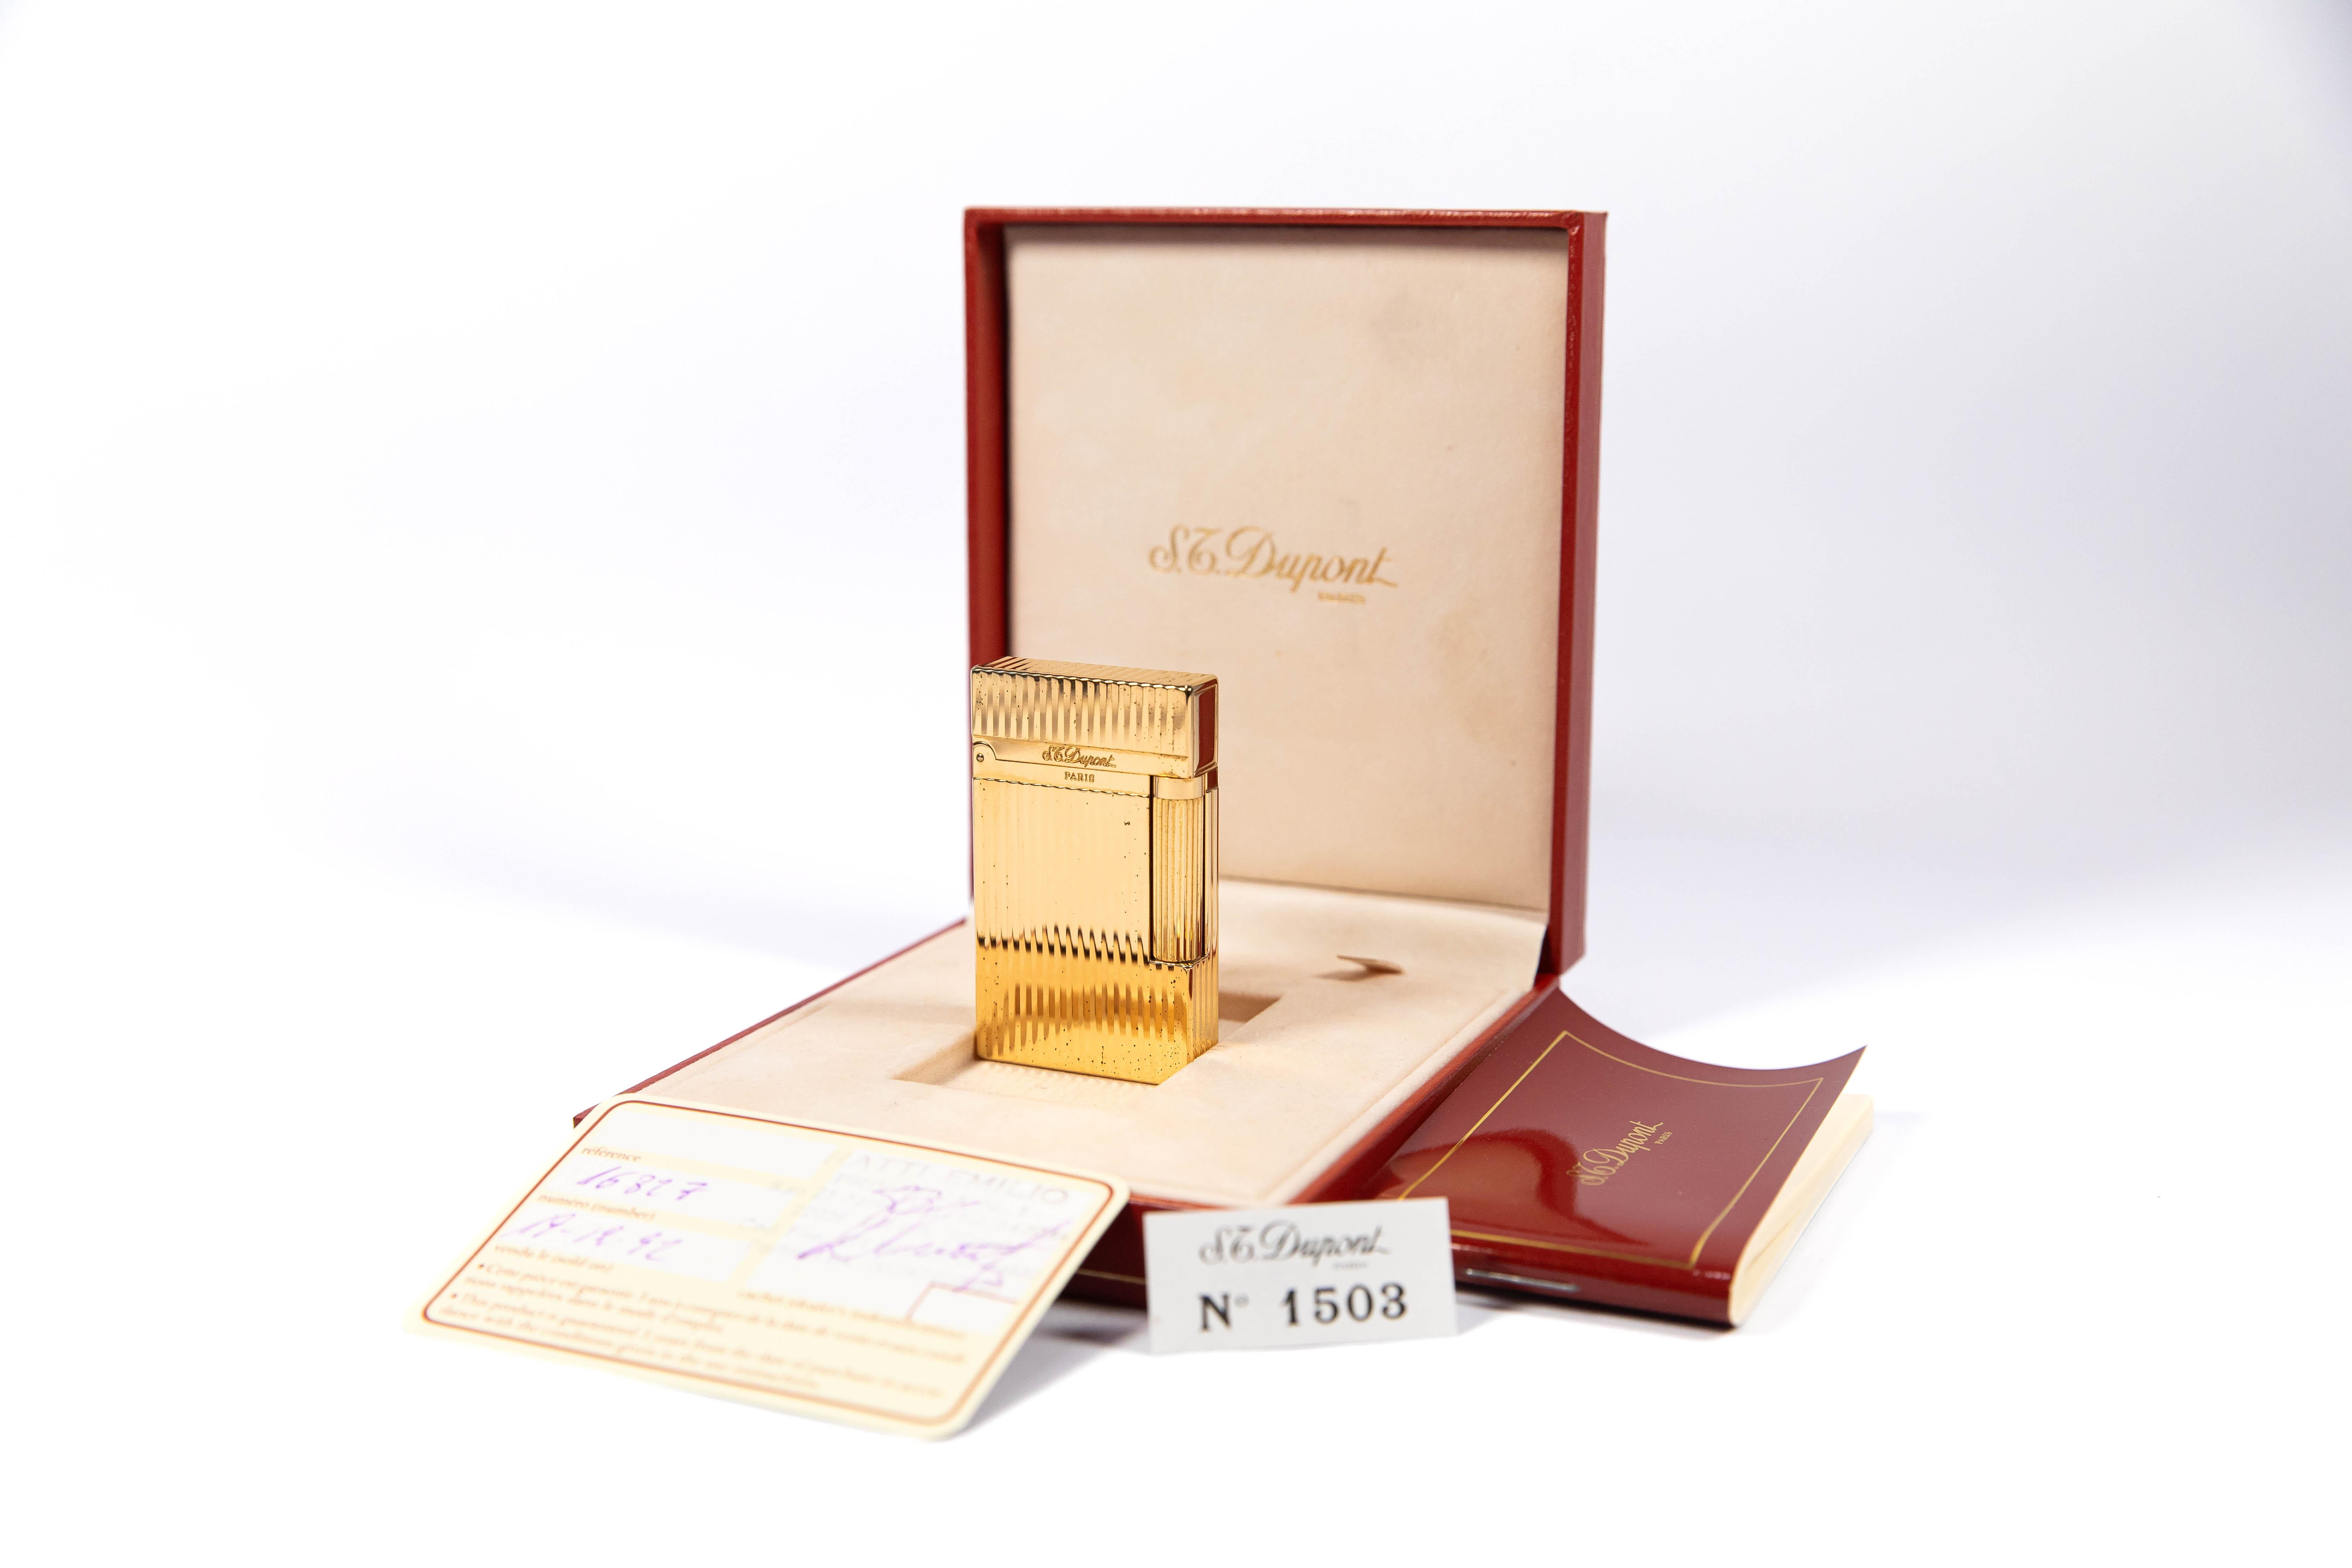 Vintage NOS Authentic Gold plated Ligne 2 ST Dupont Lighter from 1992 Complete Box & Papers

The iconic S.T. Dupont name is known for quality, well-made cigarette lighters and other luxury implements. The company’s origin can be traced to Simon